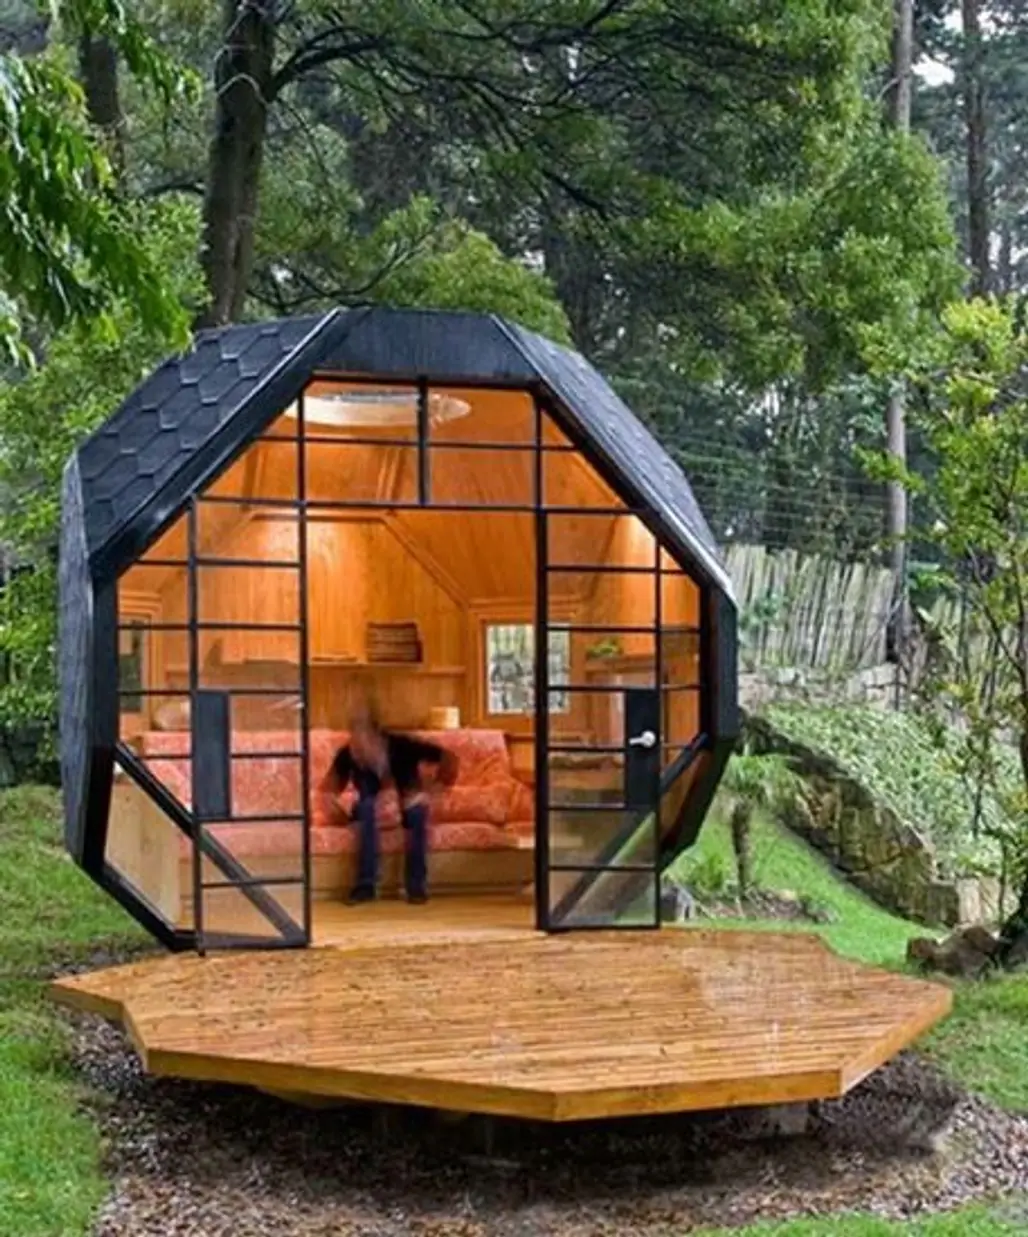 building,shed,hut,outdoor structure,backyard,